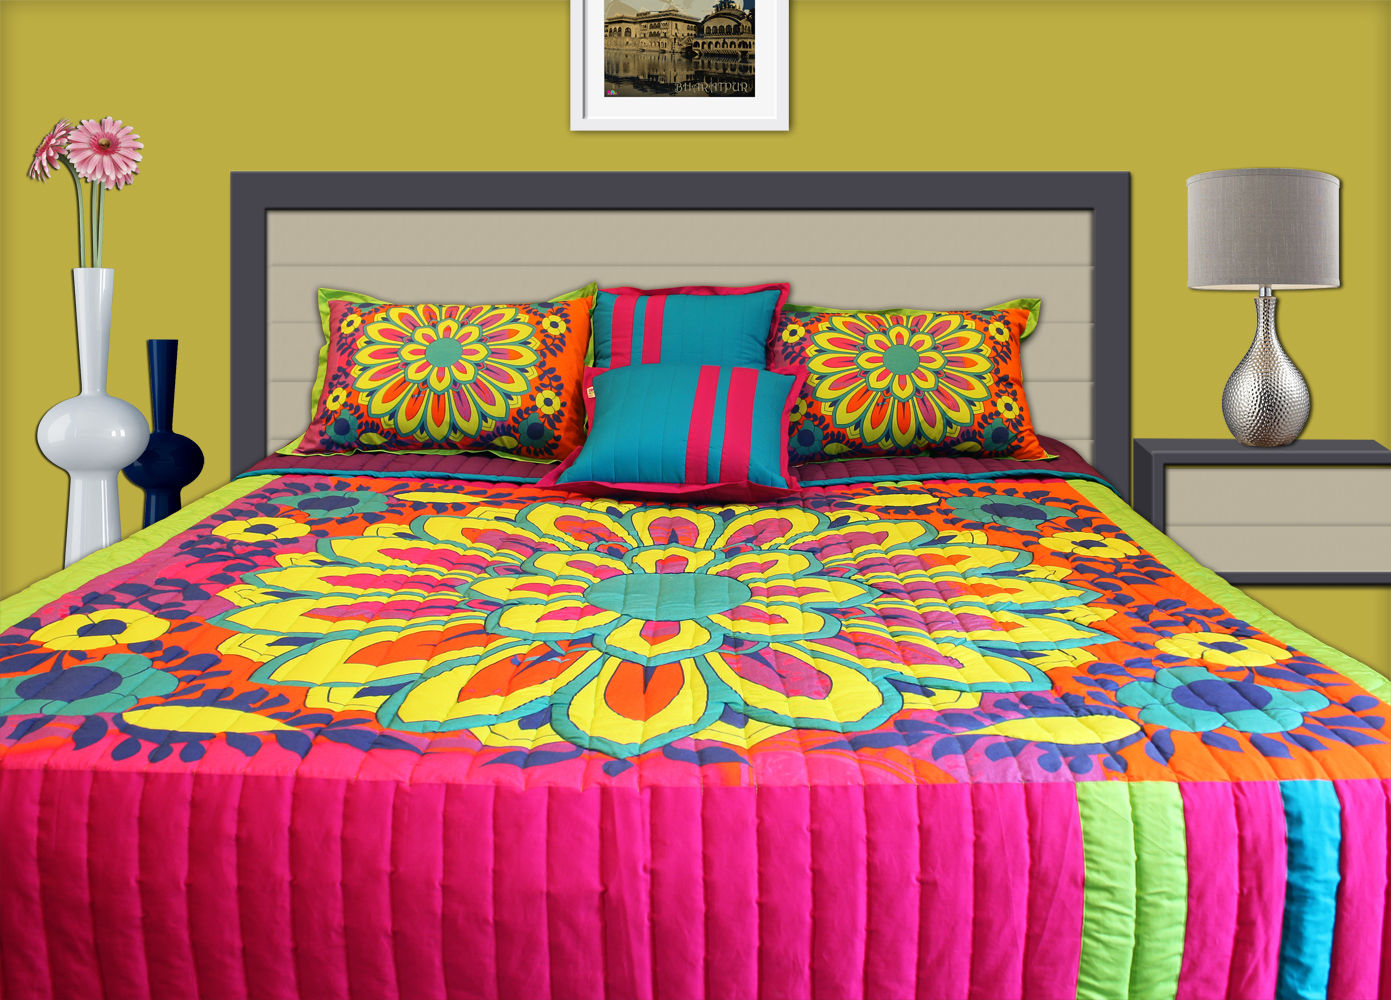 Big Flower Motif King Size Quilted Bedspread homify Modern style bedroom Cotton Red Textiles